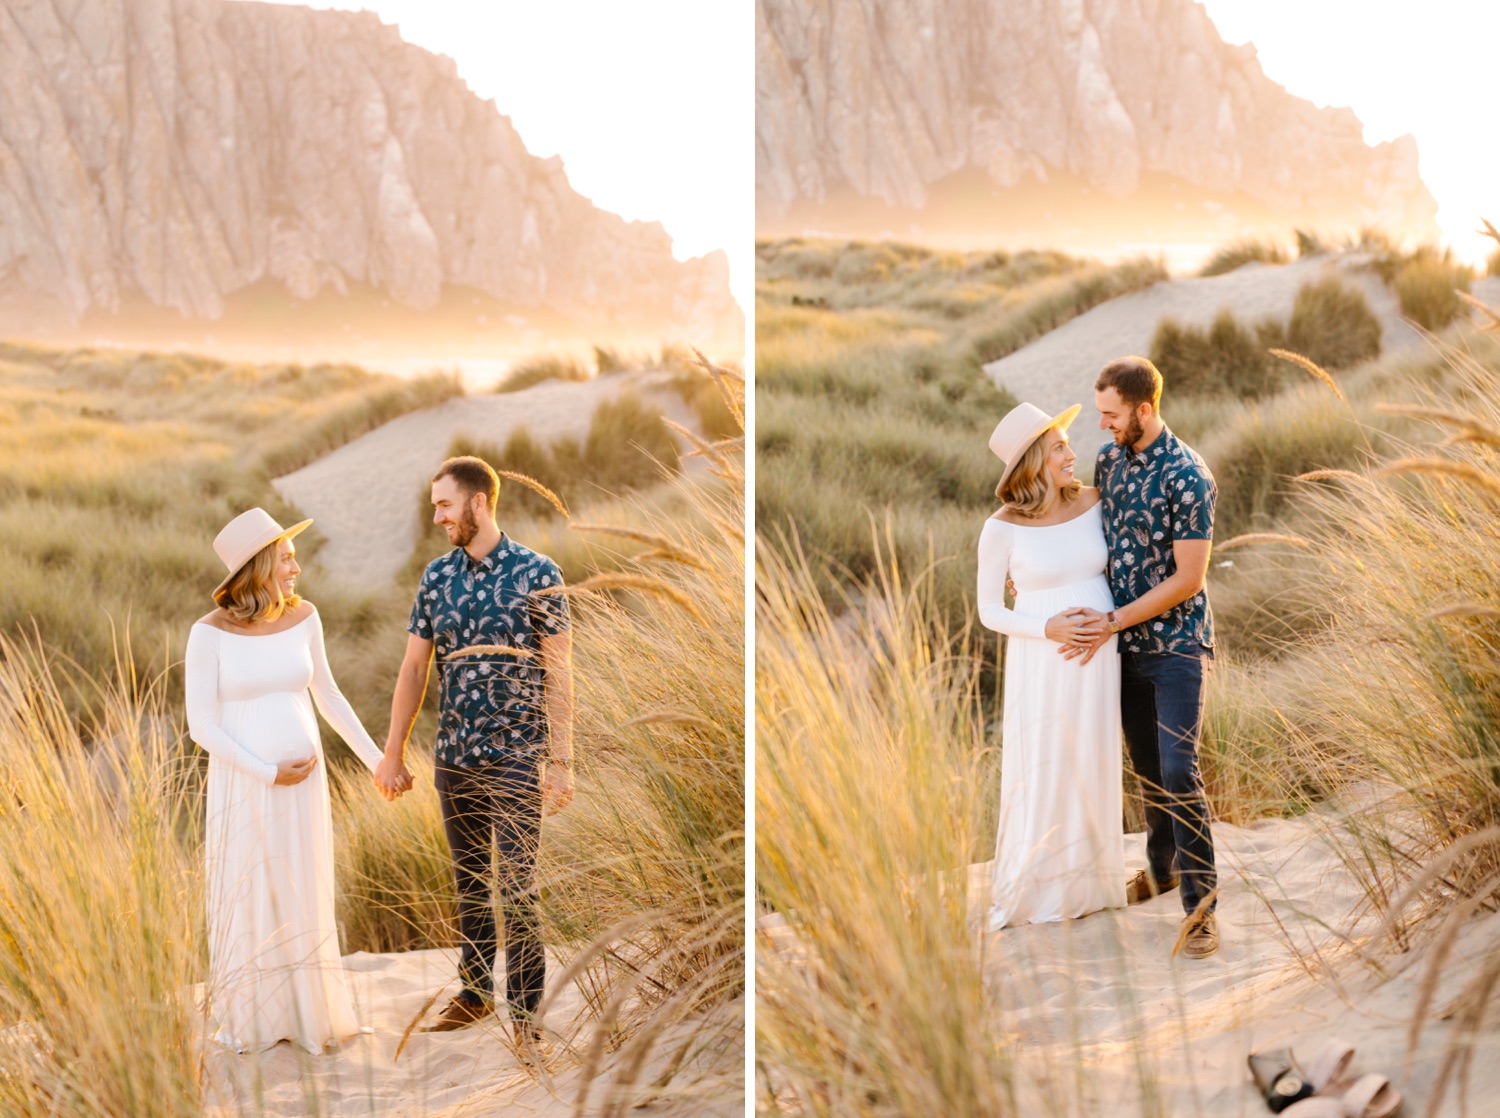 Couple embracing with Morro Rock in the background for their maternity photos with tayler Enerle in morro bay, california